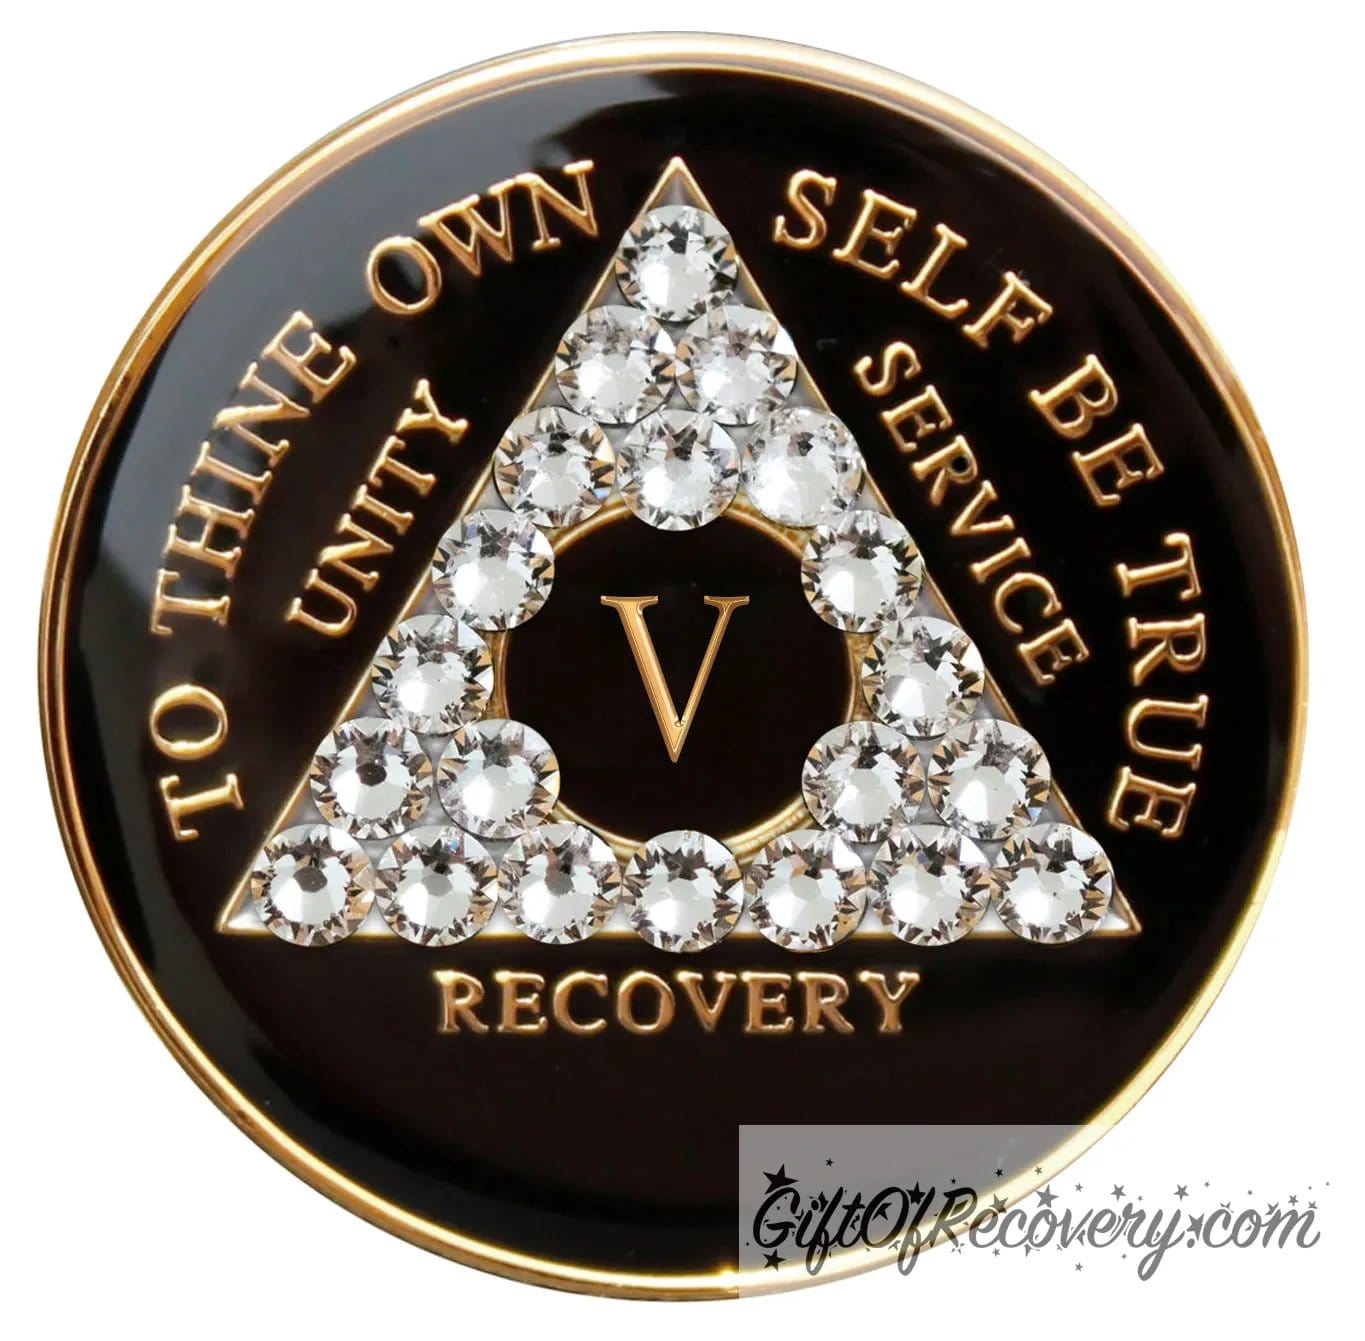 5 year AA medallion black onyx with 21 clear genuine crystals in the shape of the triangle, to thine own self be true, unity, service, recovery, and the roman numeral are embossed with 14k gold-plated brass, the recovery medallion is sealed with resin for a glossy finish that will last and is scratch proof.